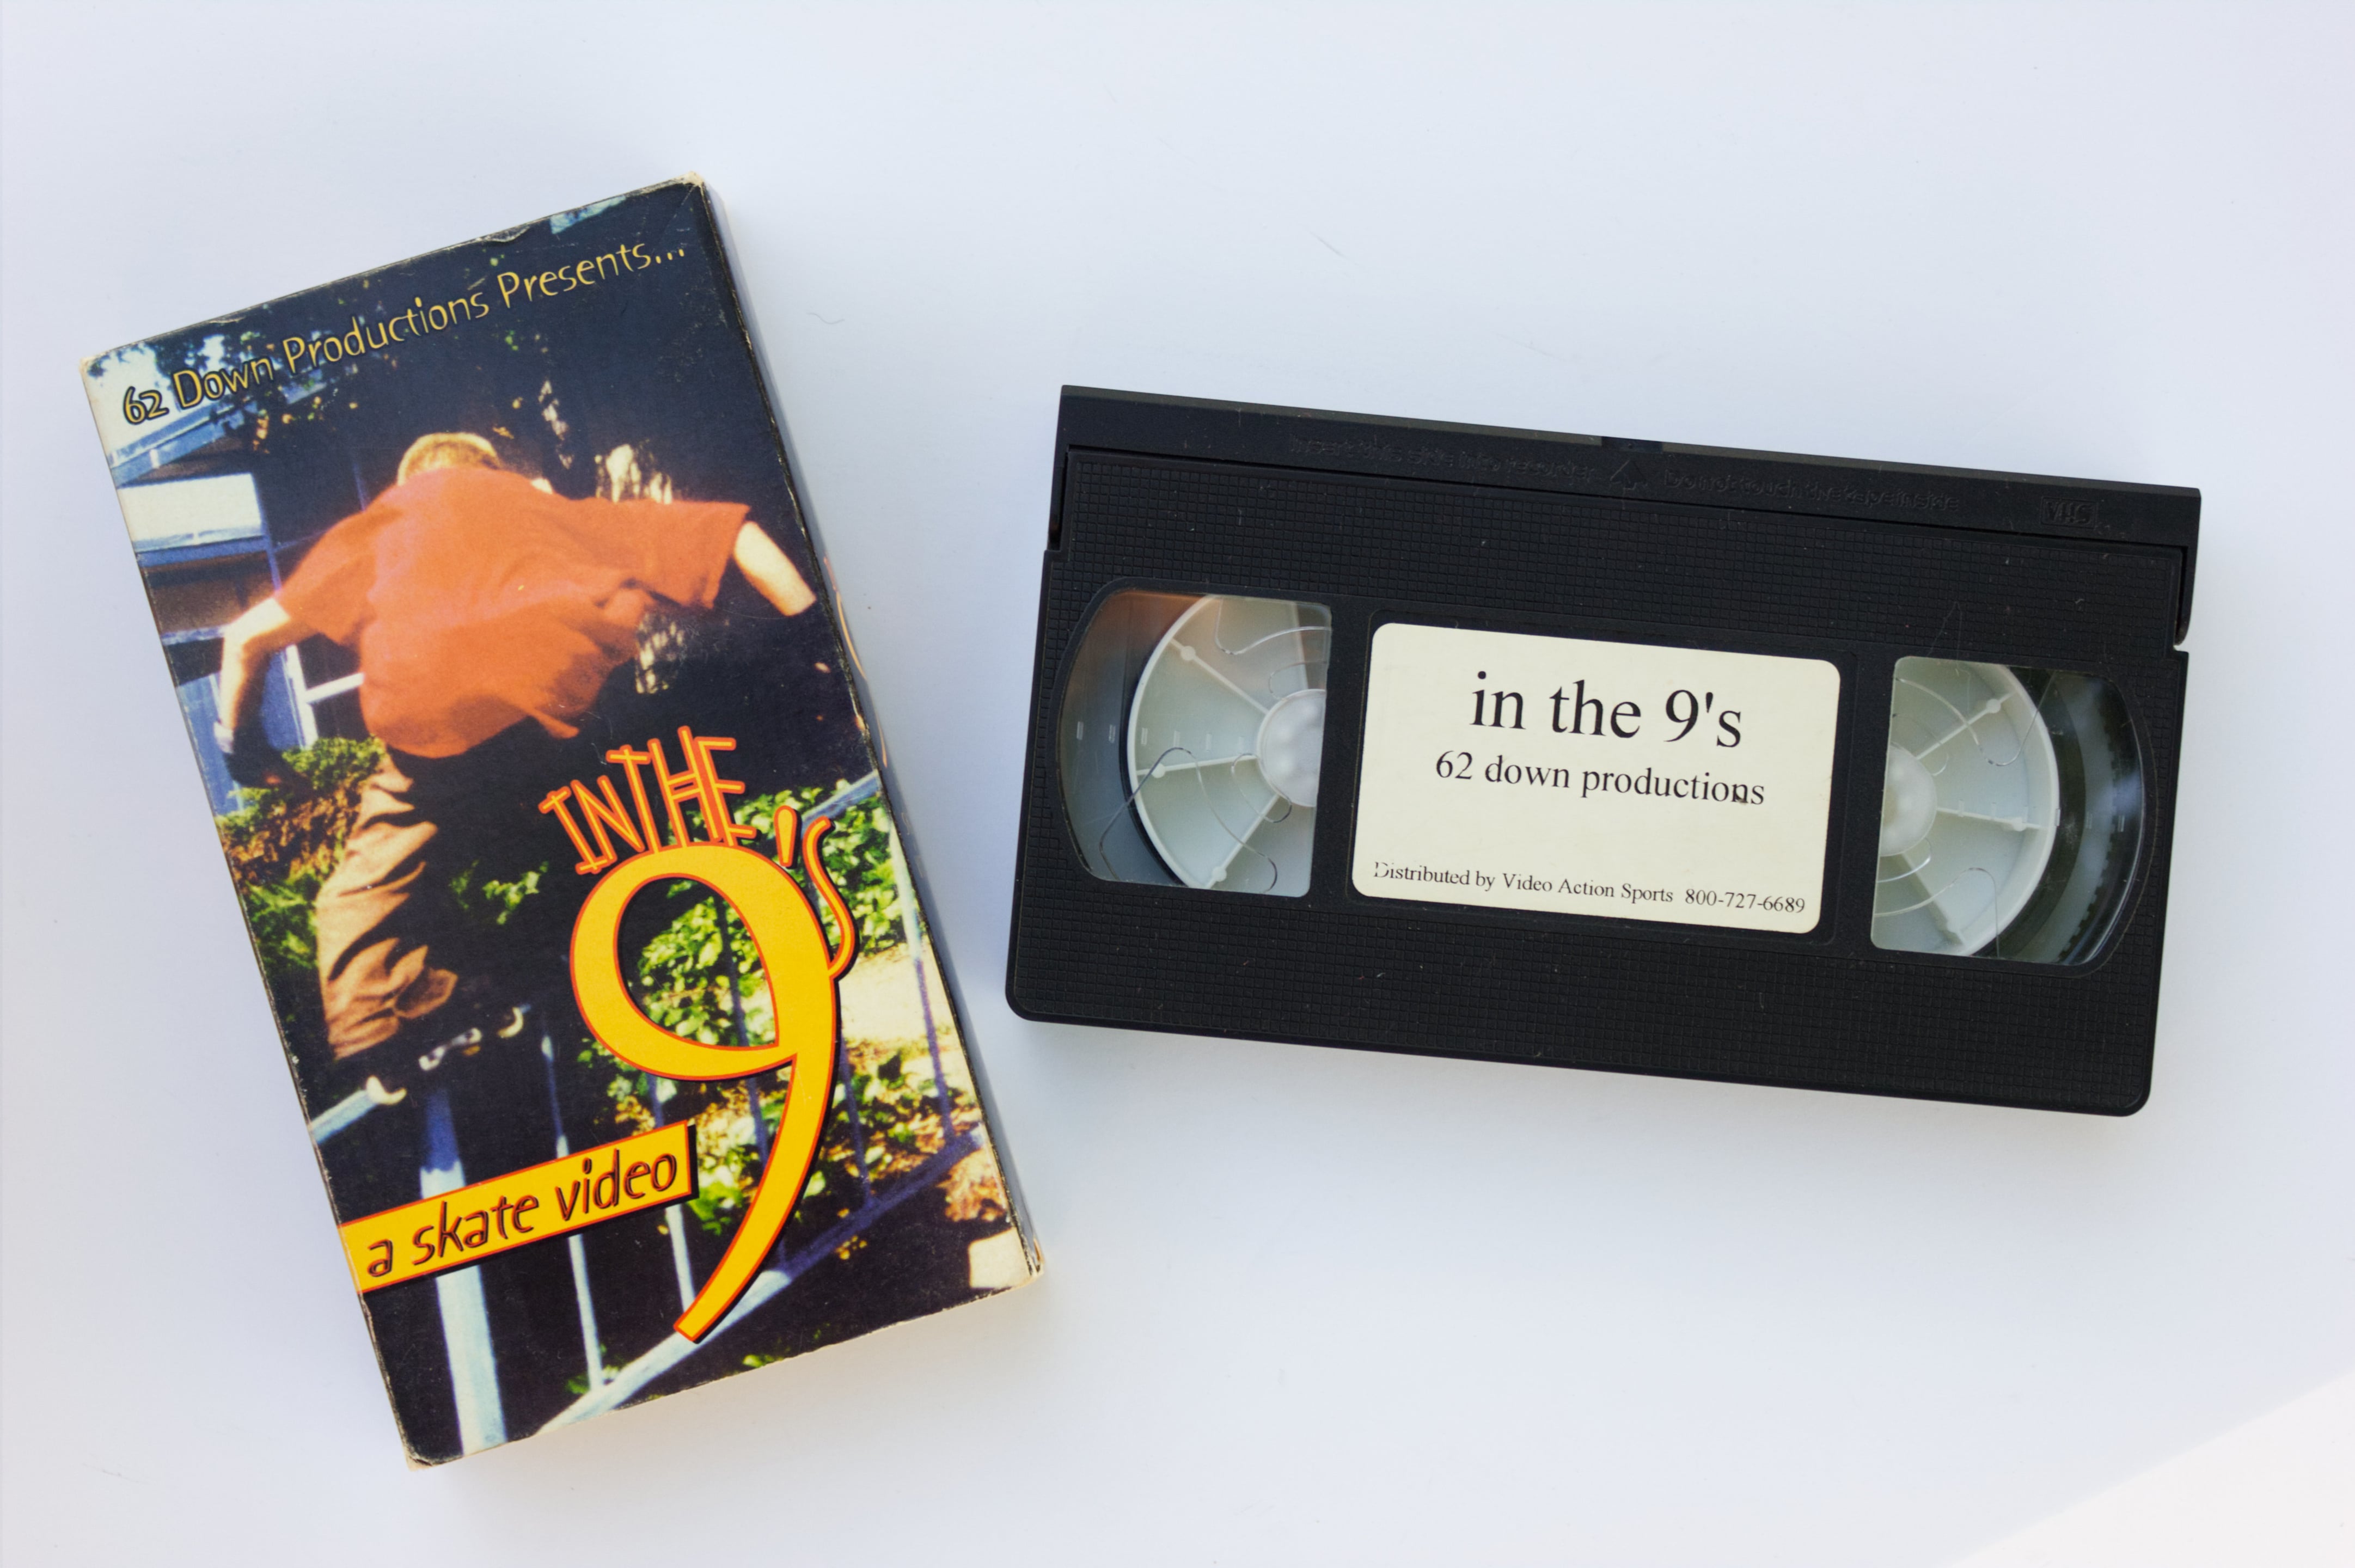 In the 9's (1996) on Vimeo